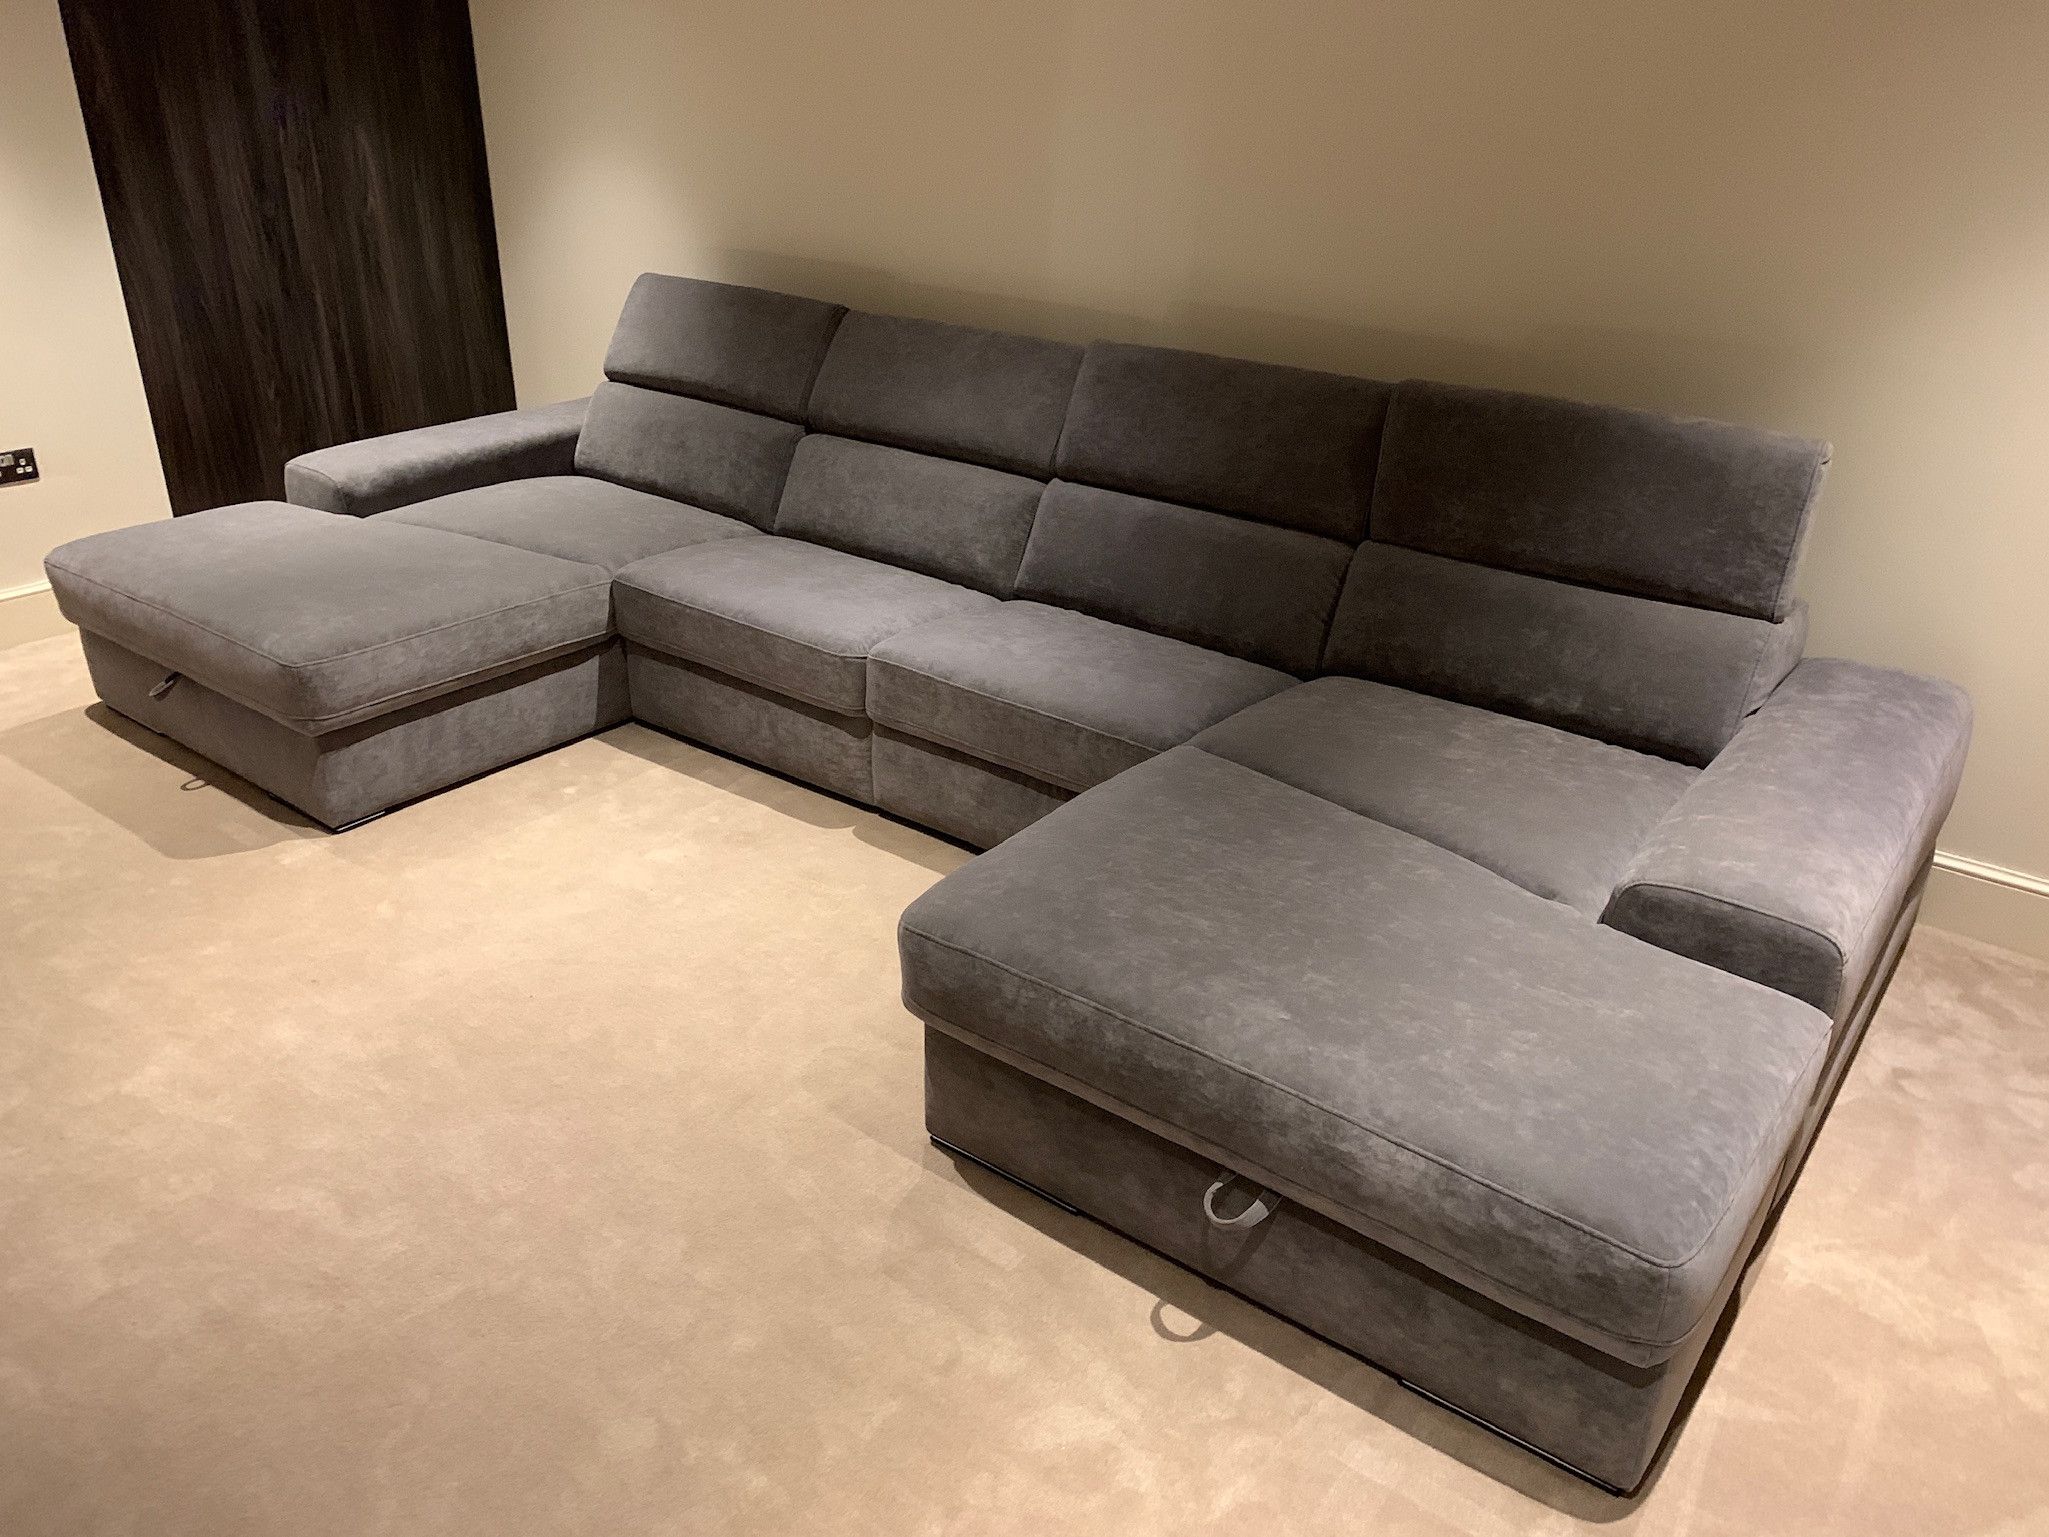 Plaza Luxury U Shape Modular Sofa System – Sofas (4243) – Sena Home Throughout U Shaped Couches In Beige (View 19 of 20)